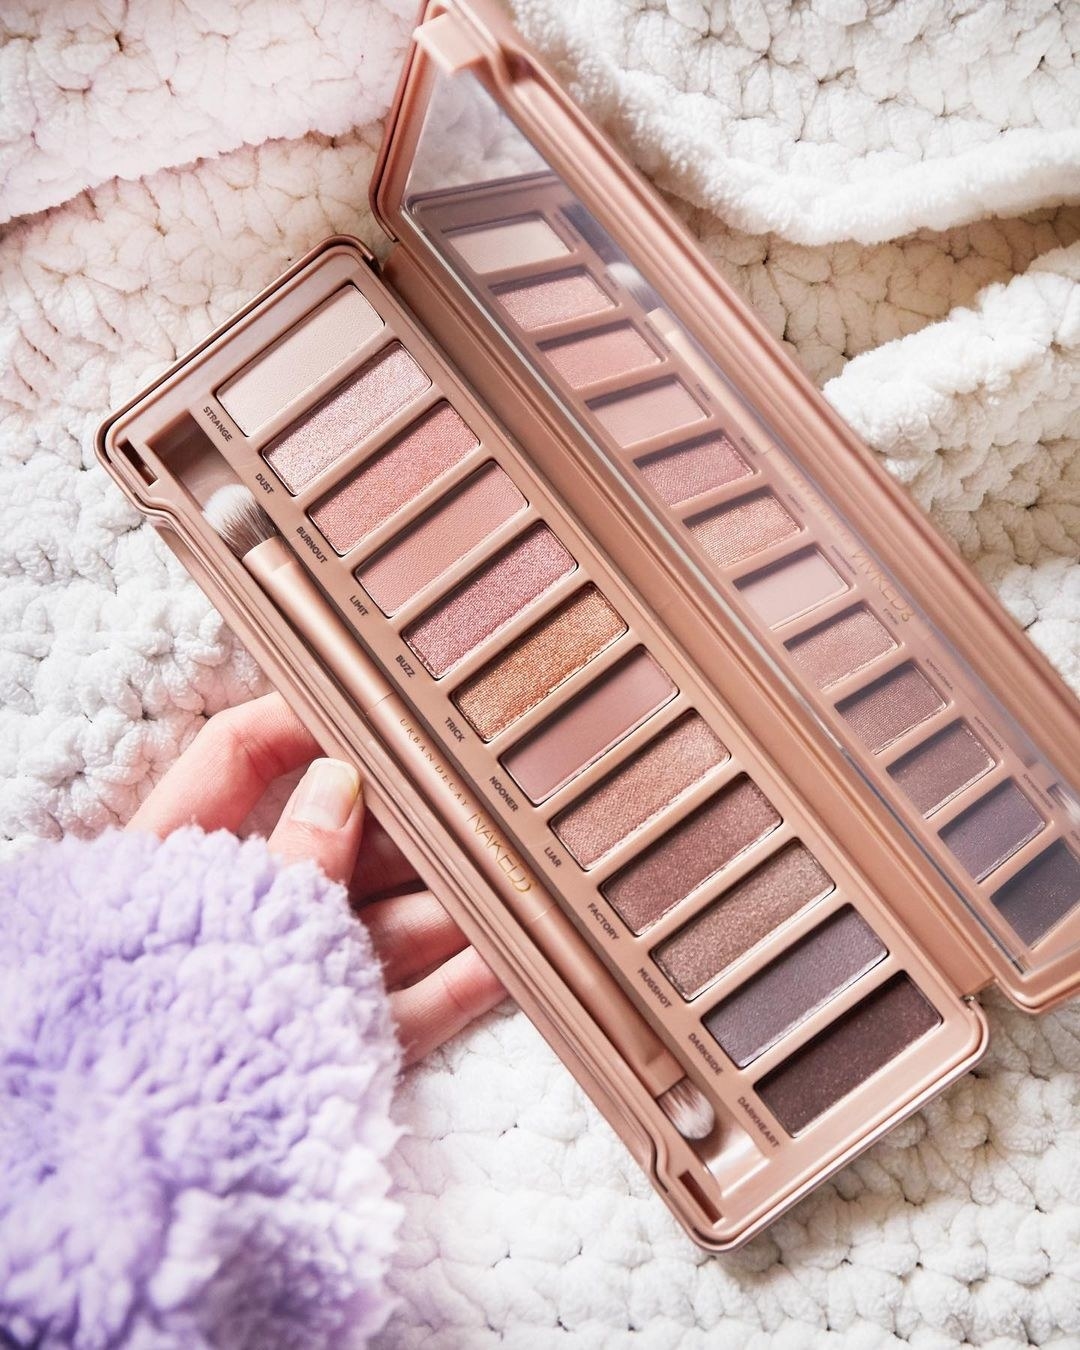 a person holding up the open naked3 palette against a fuzzy blanket